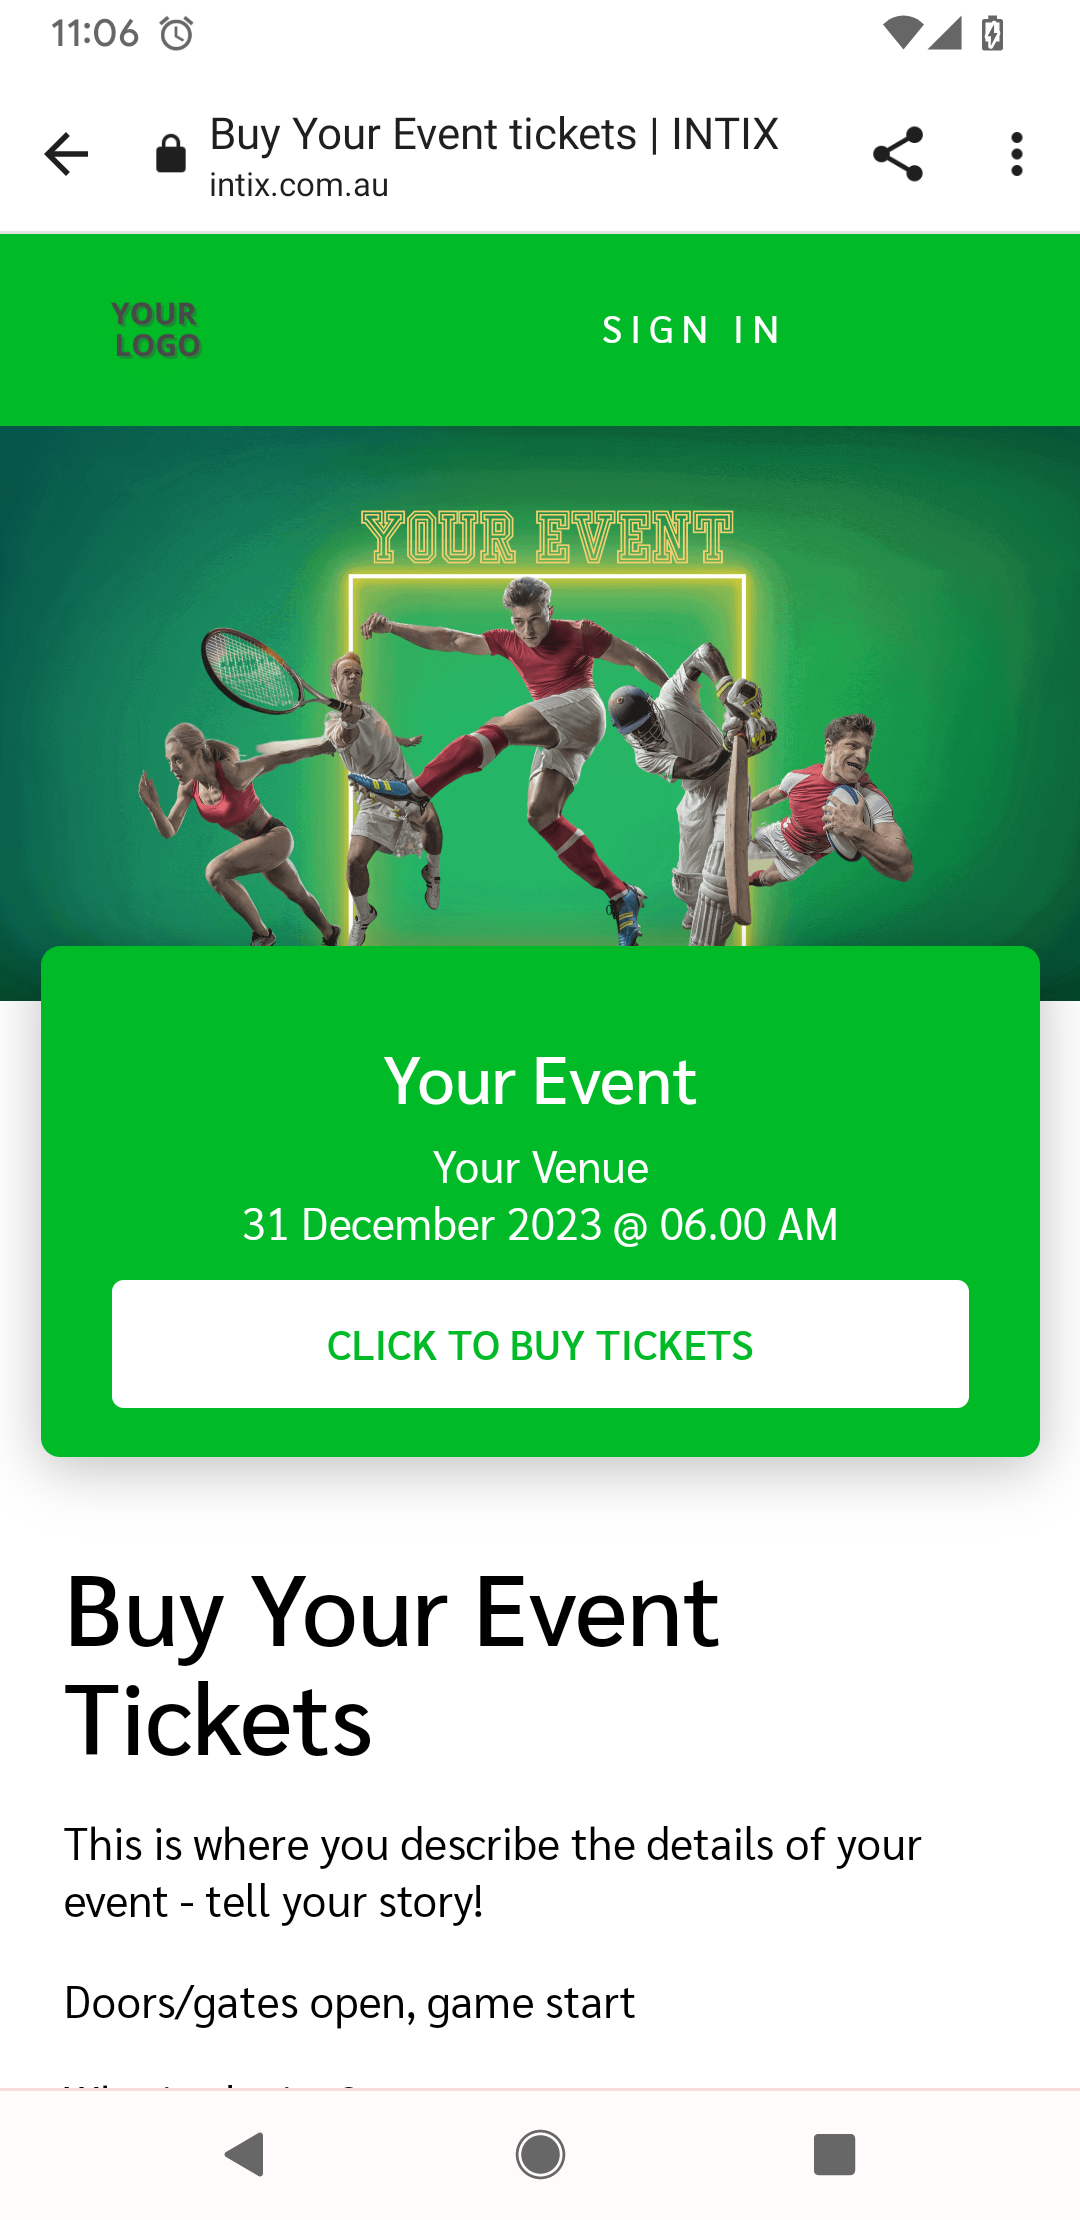 Your event example phone.png